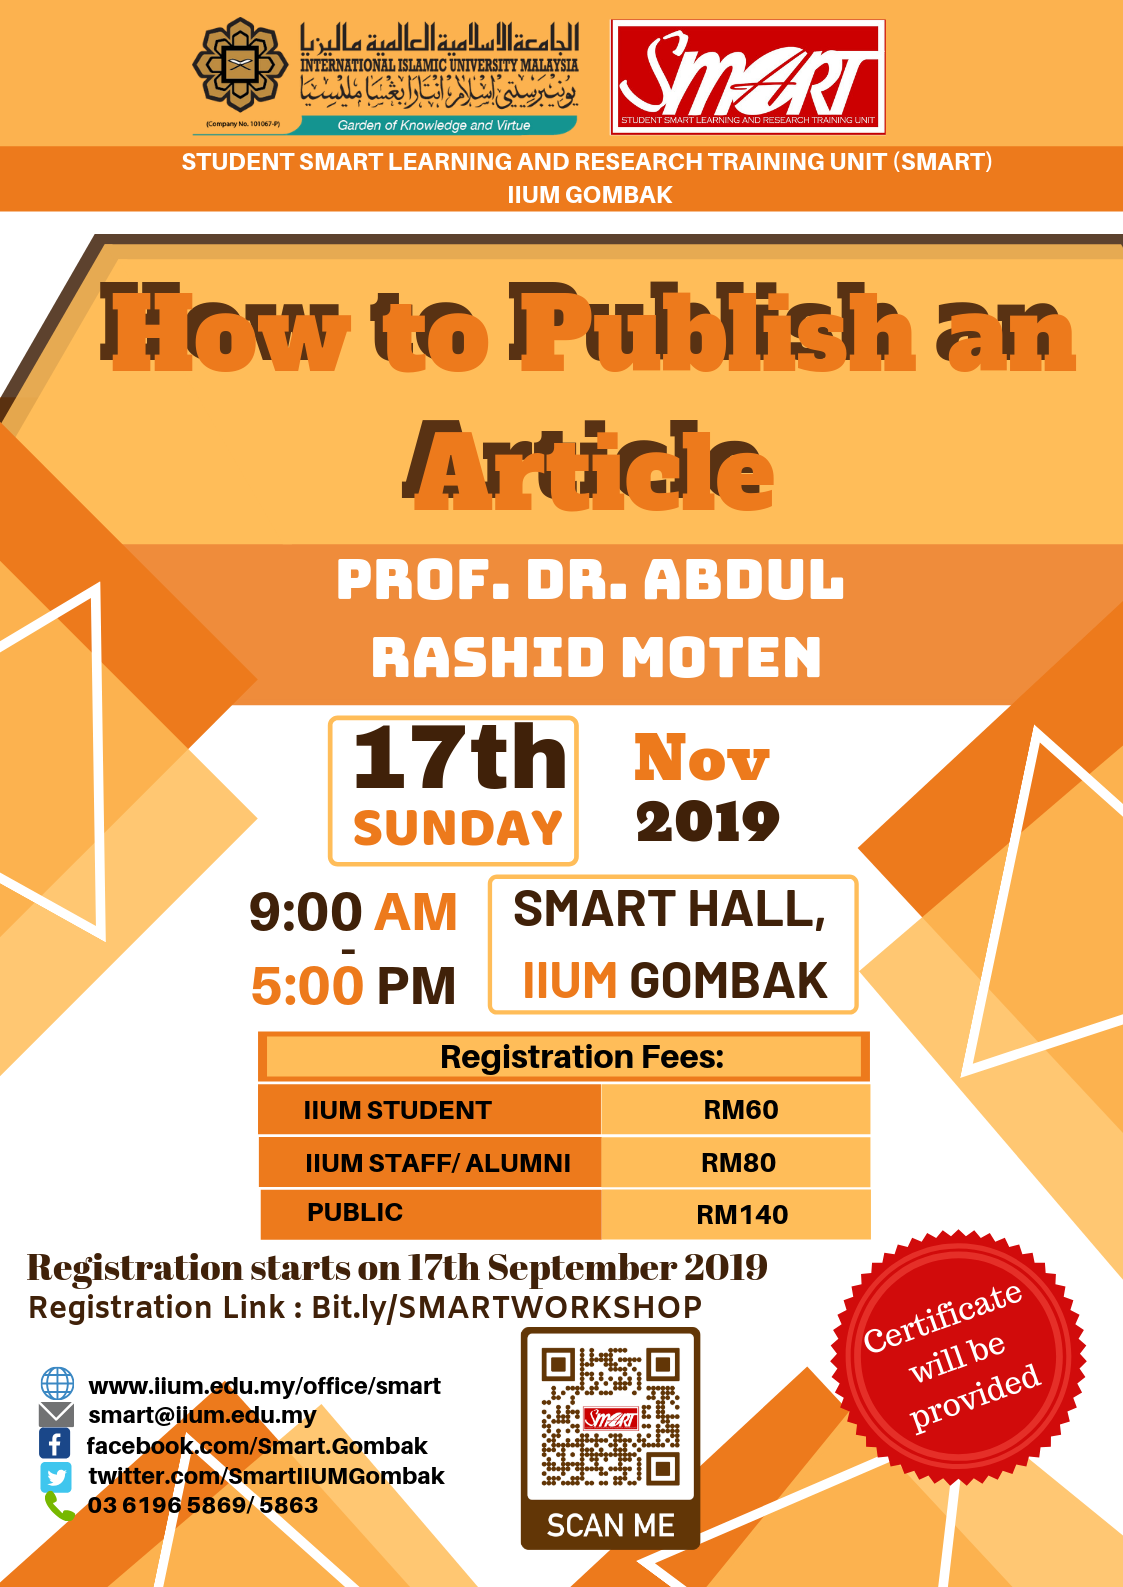 SEM 1, 19/20 - WORKSHOP - HOW TO PUBLISH AN ARTICLE